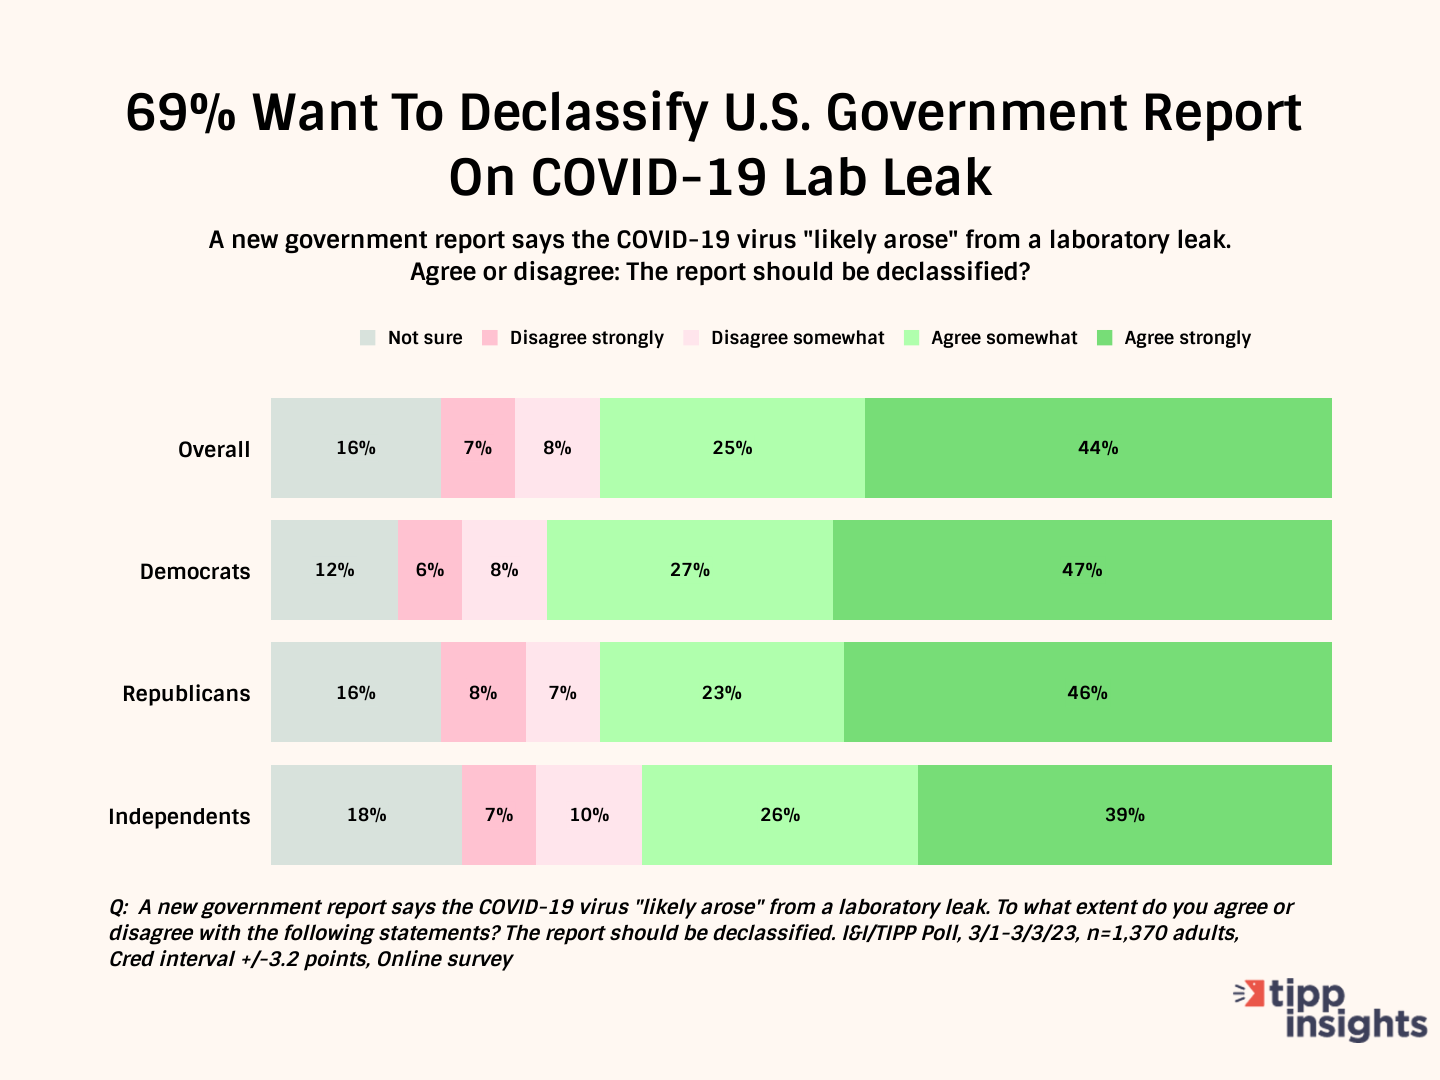 3/4 Of Americans Want Congress To Investigate COVID-19's Origins: I&I/TIPP Poll